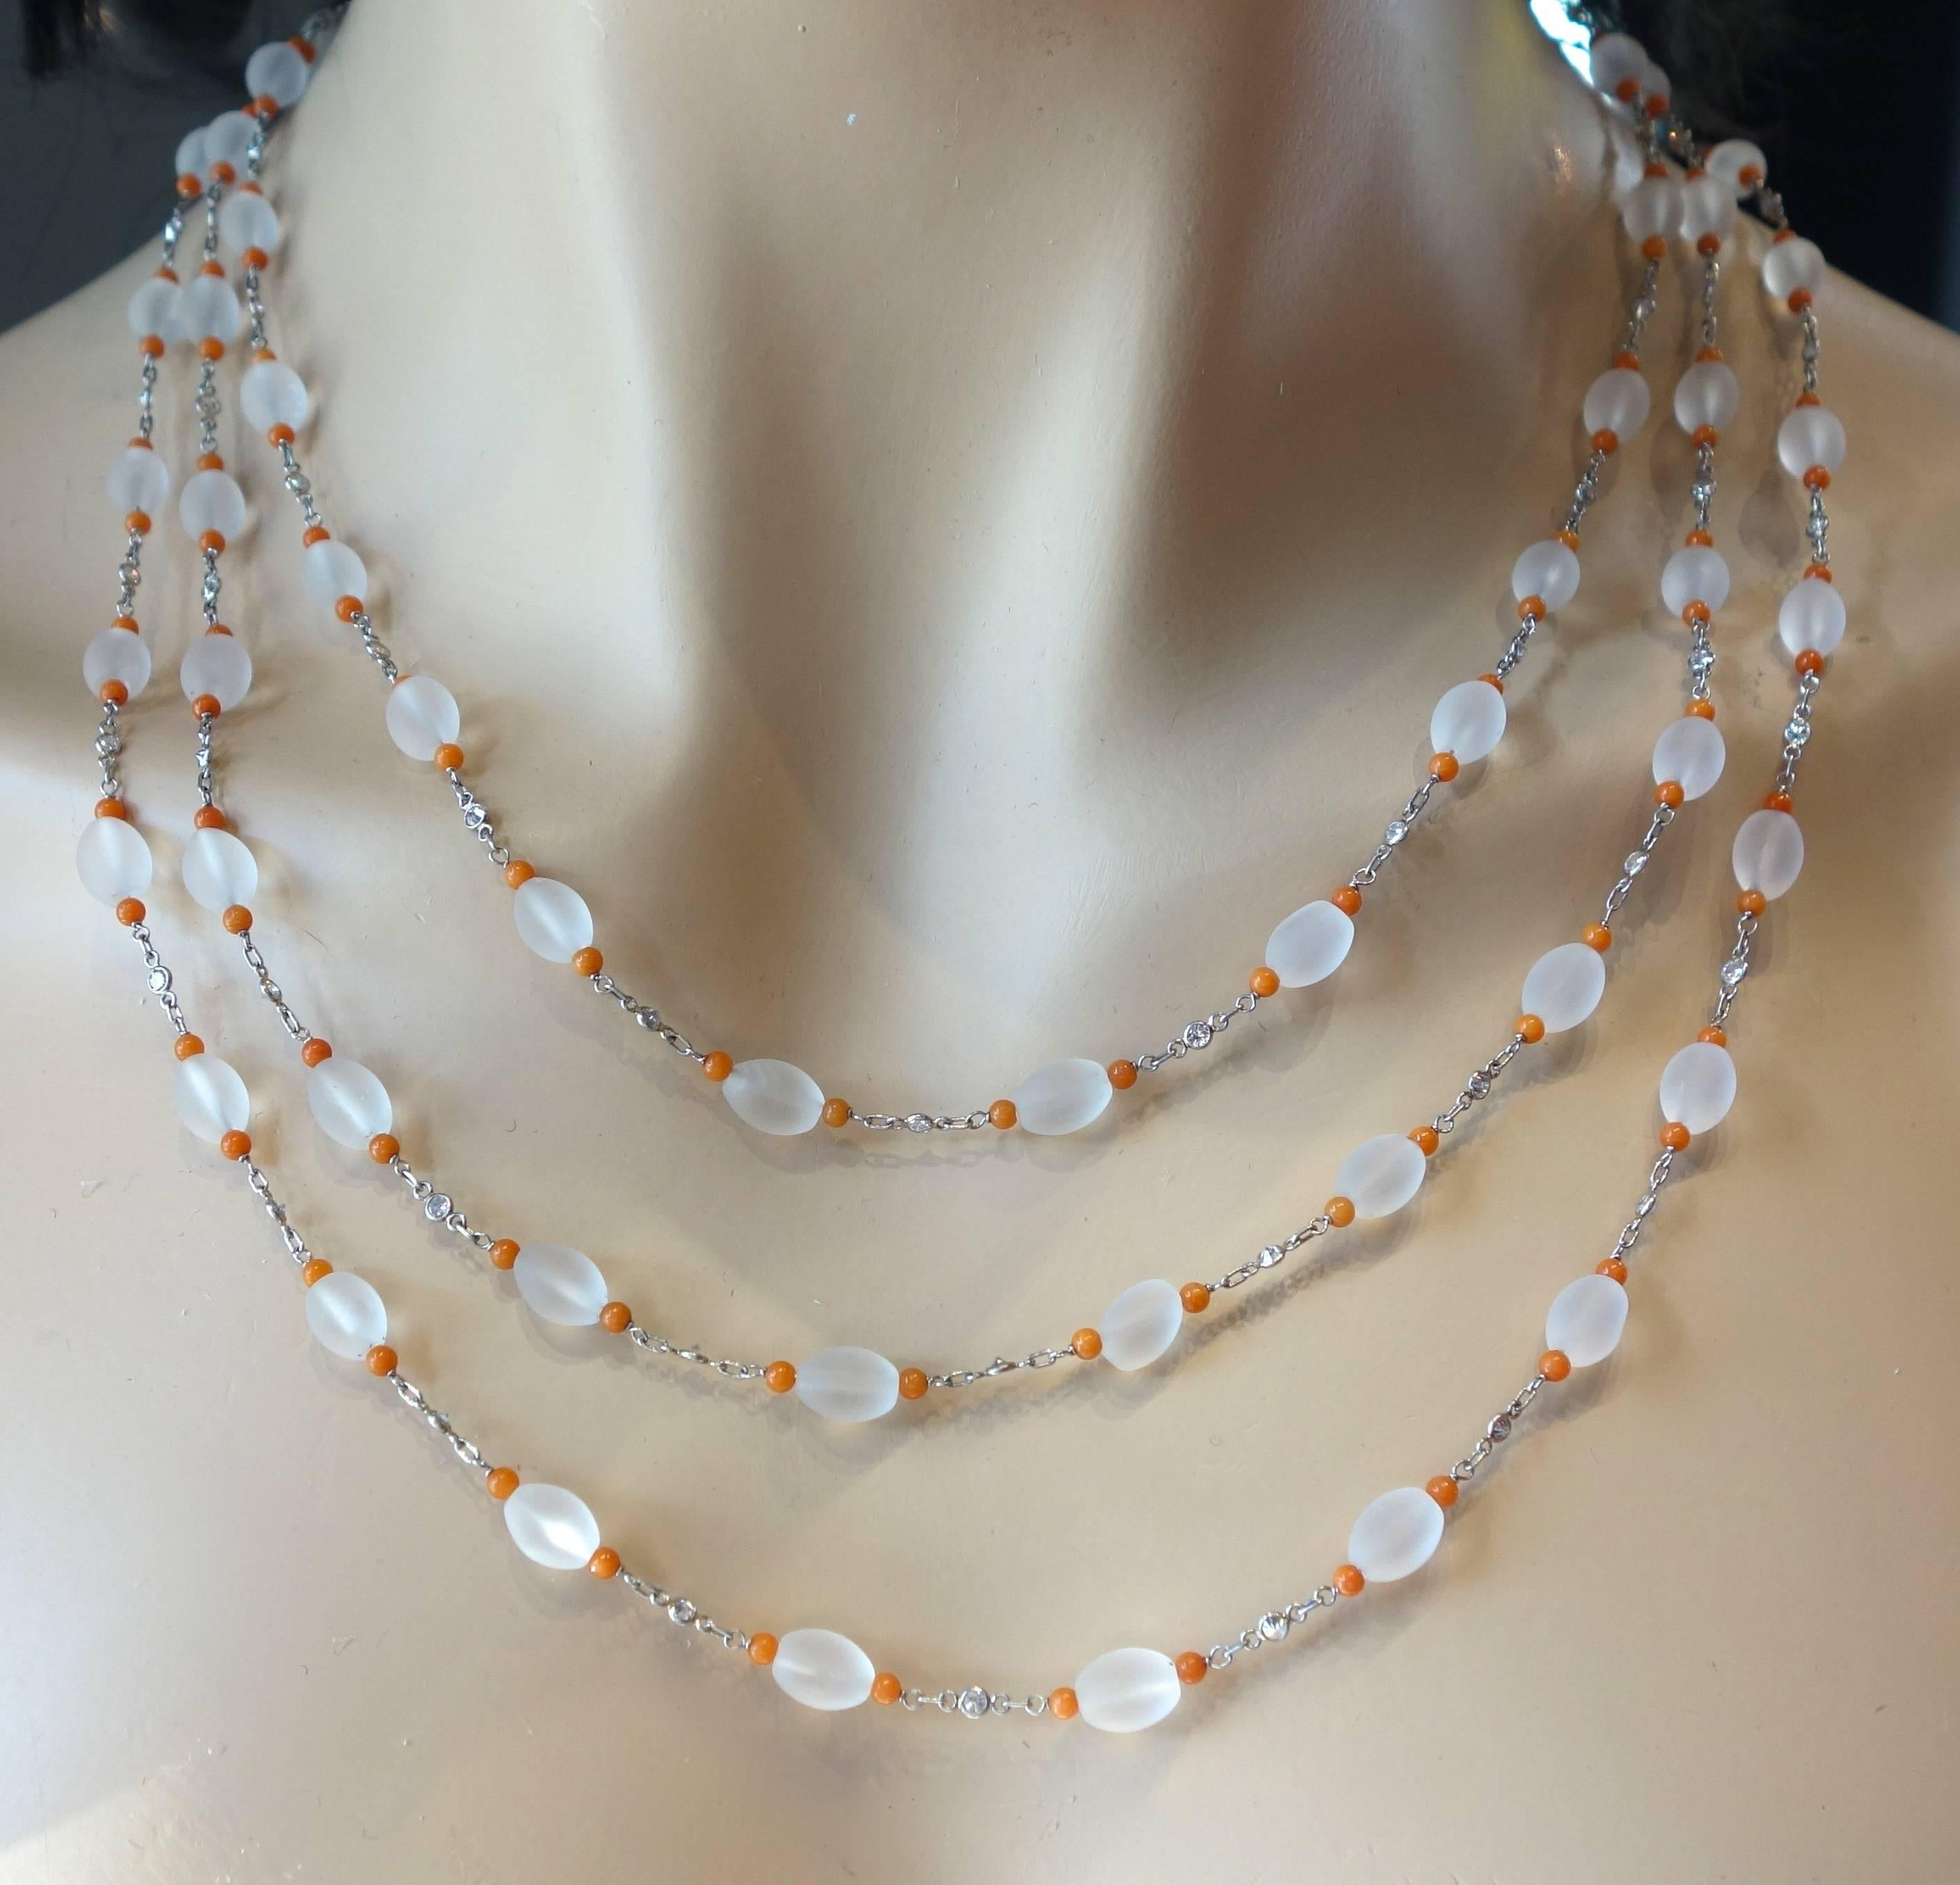 This long chain possesses frosted Rock Crystal interspersed with diamonds and orange enamel beads.  The necklace is 67 inches long and can be worn a variety of lengths - one long length, doubled or even tripled around the neck.  The fine brilliant